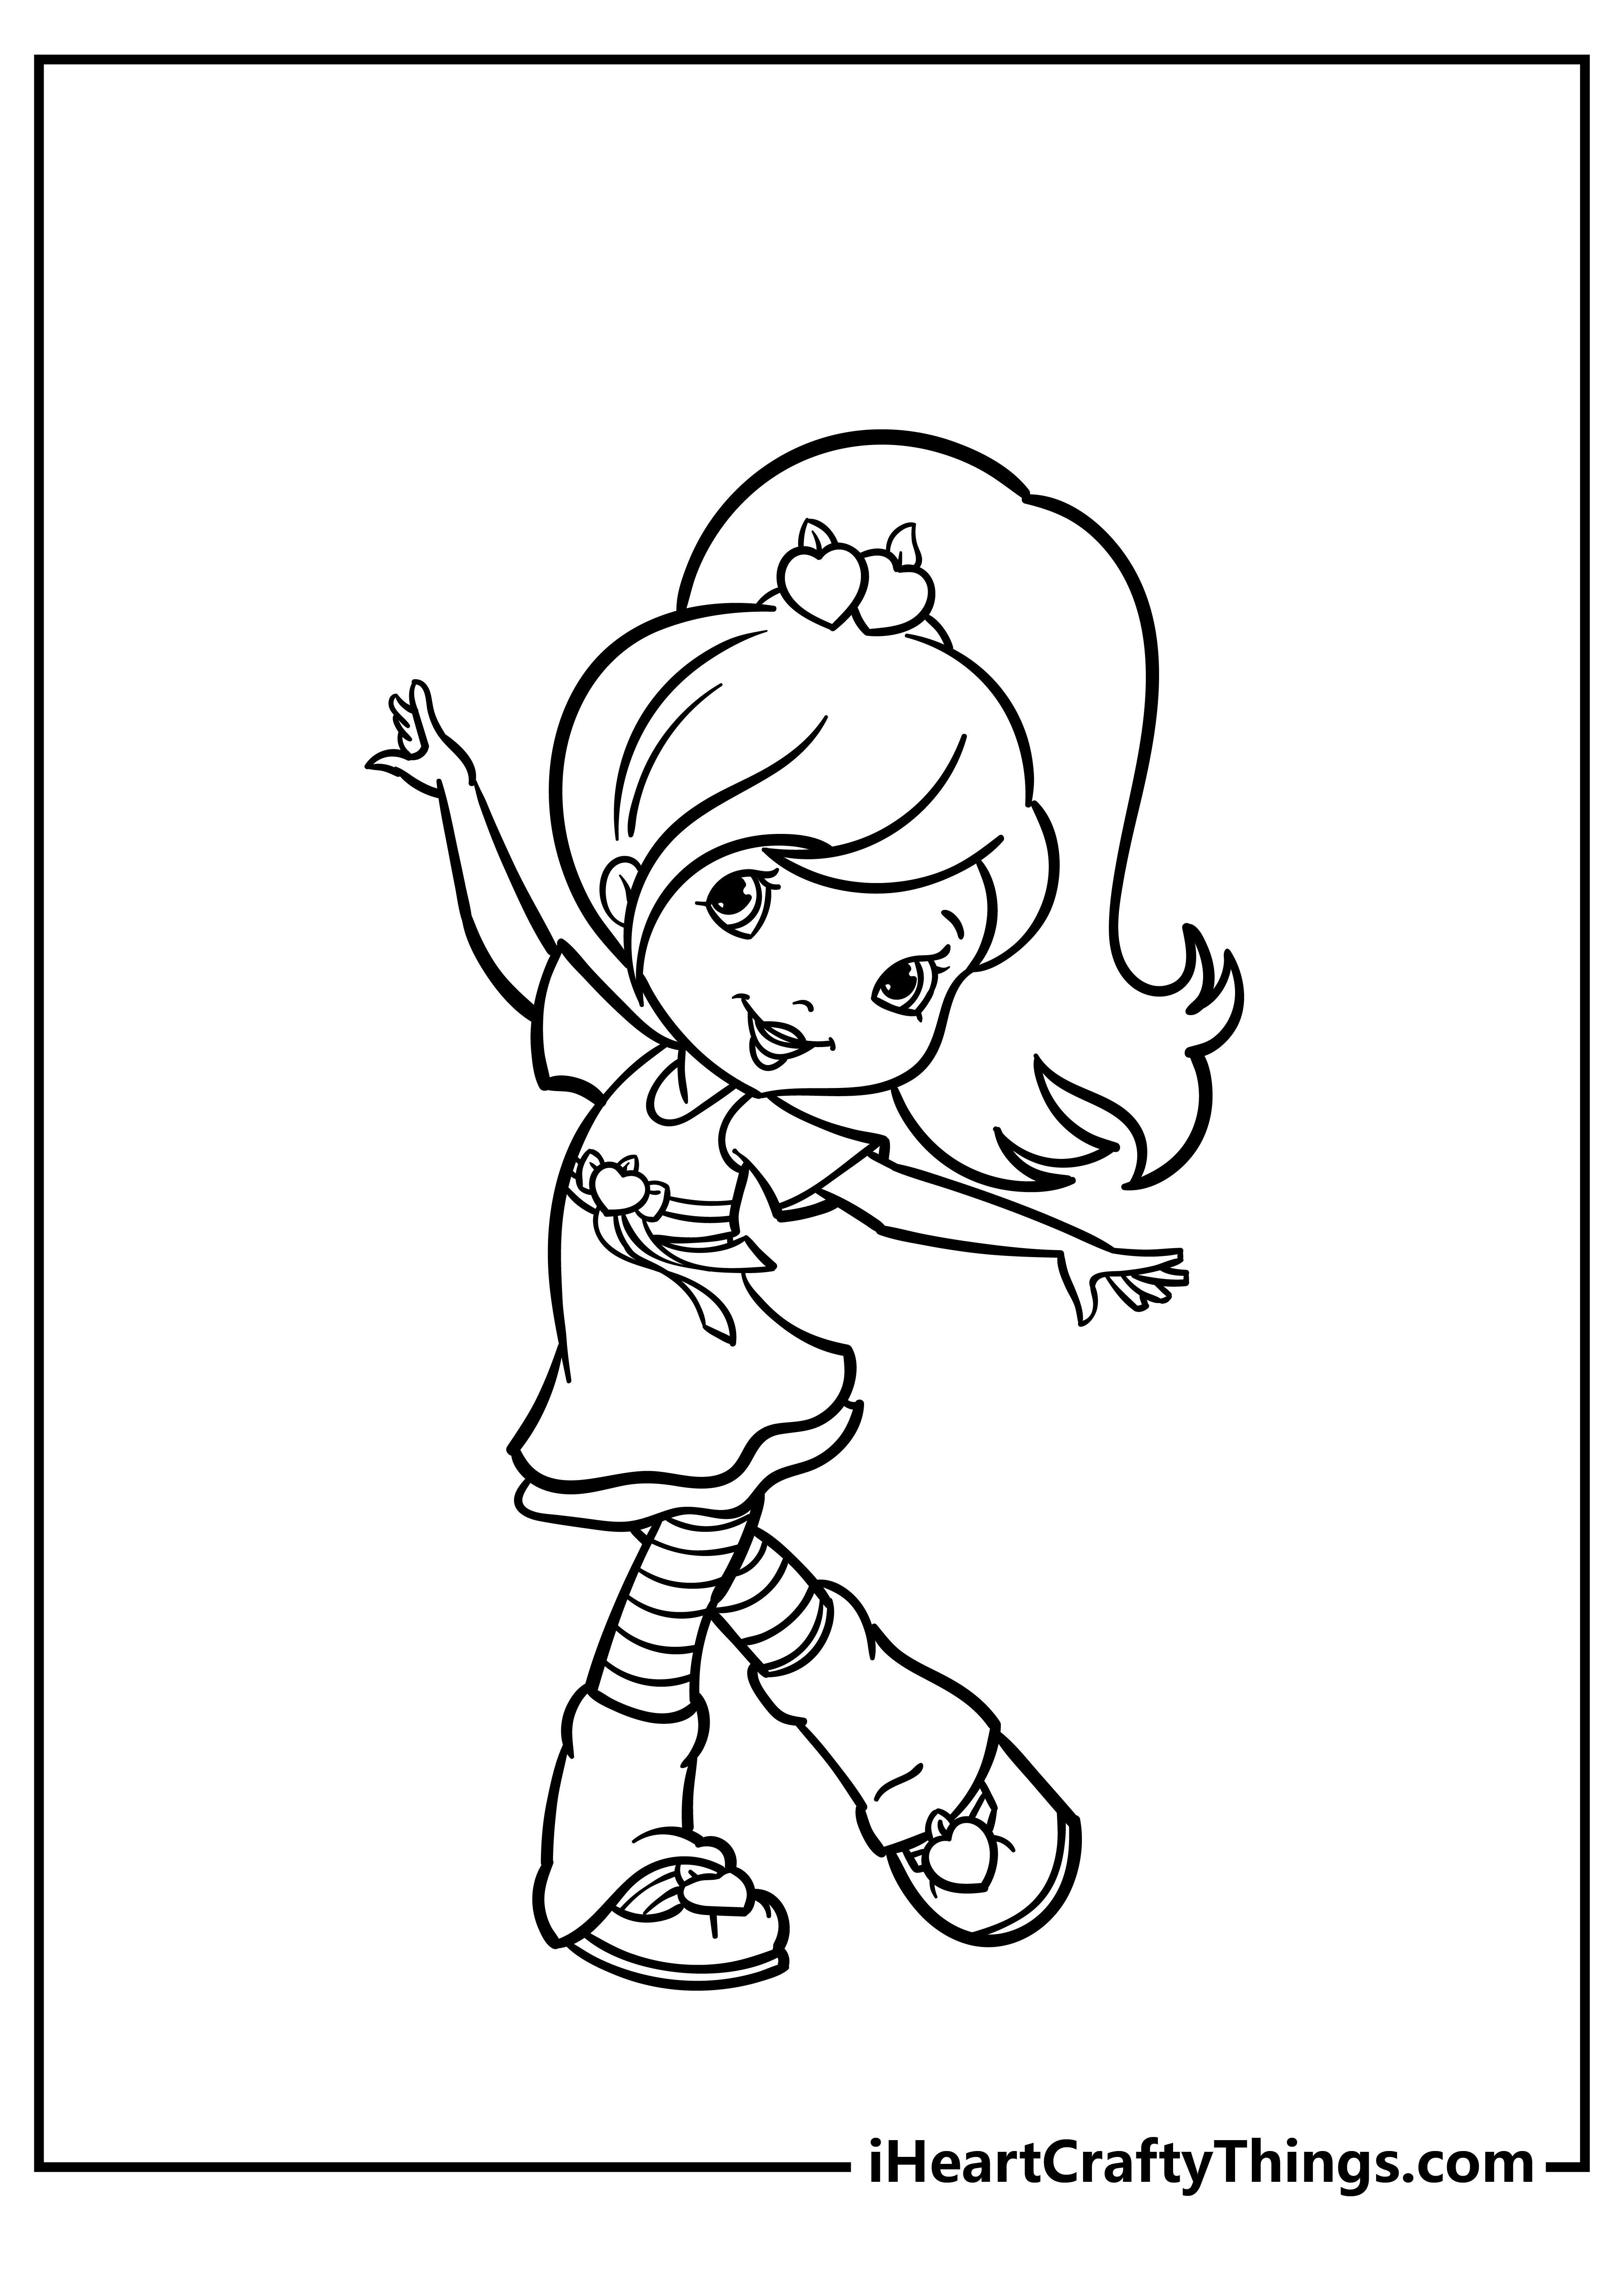 Strawberry Shortcake Coloring Pages for adults free printable